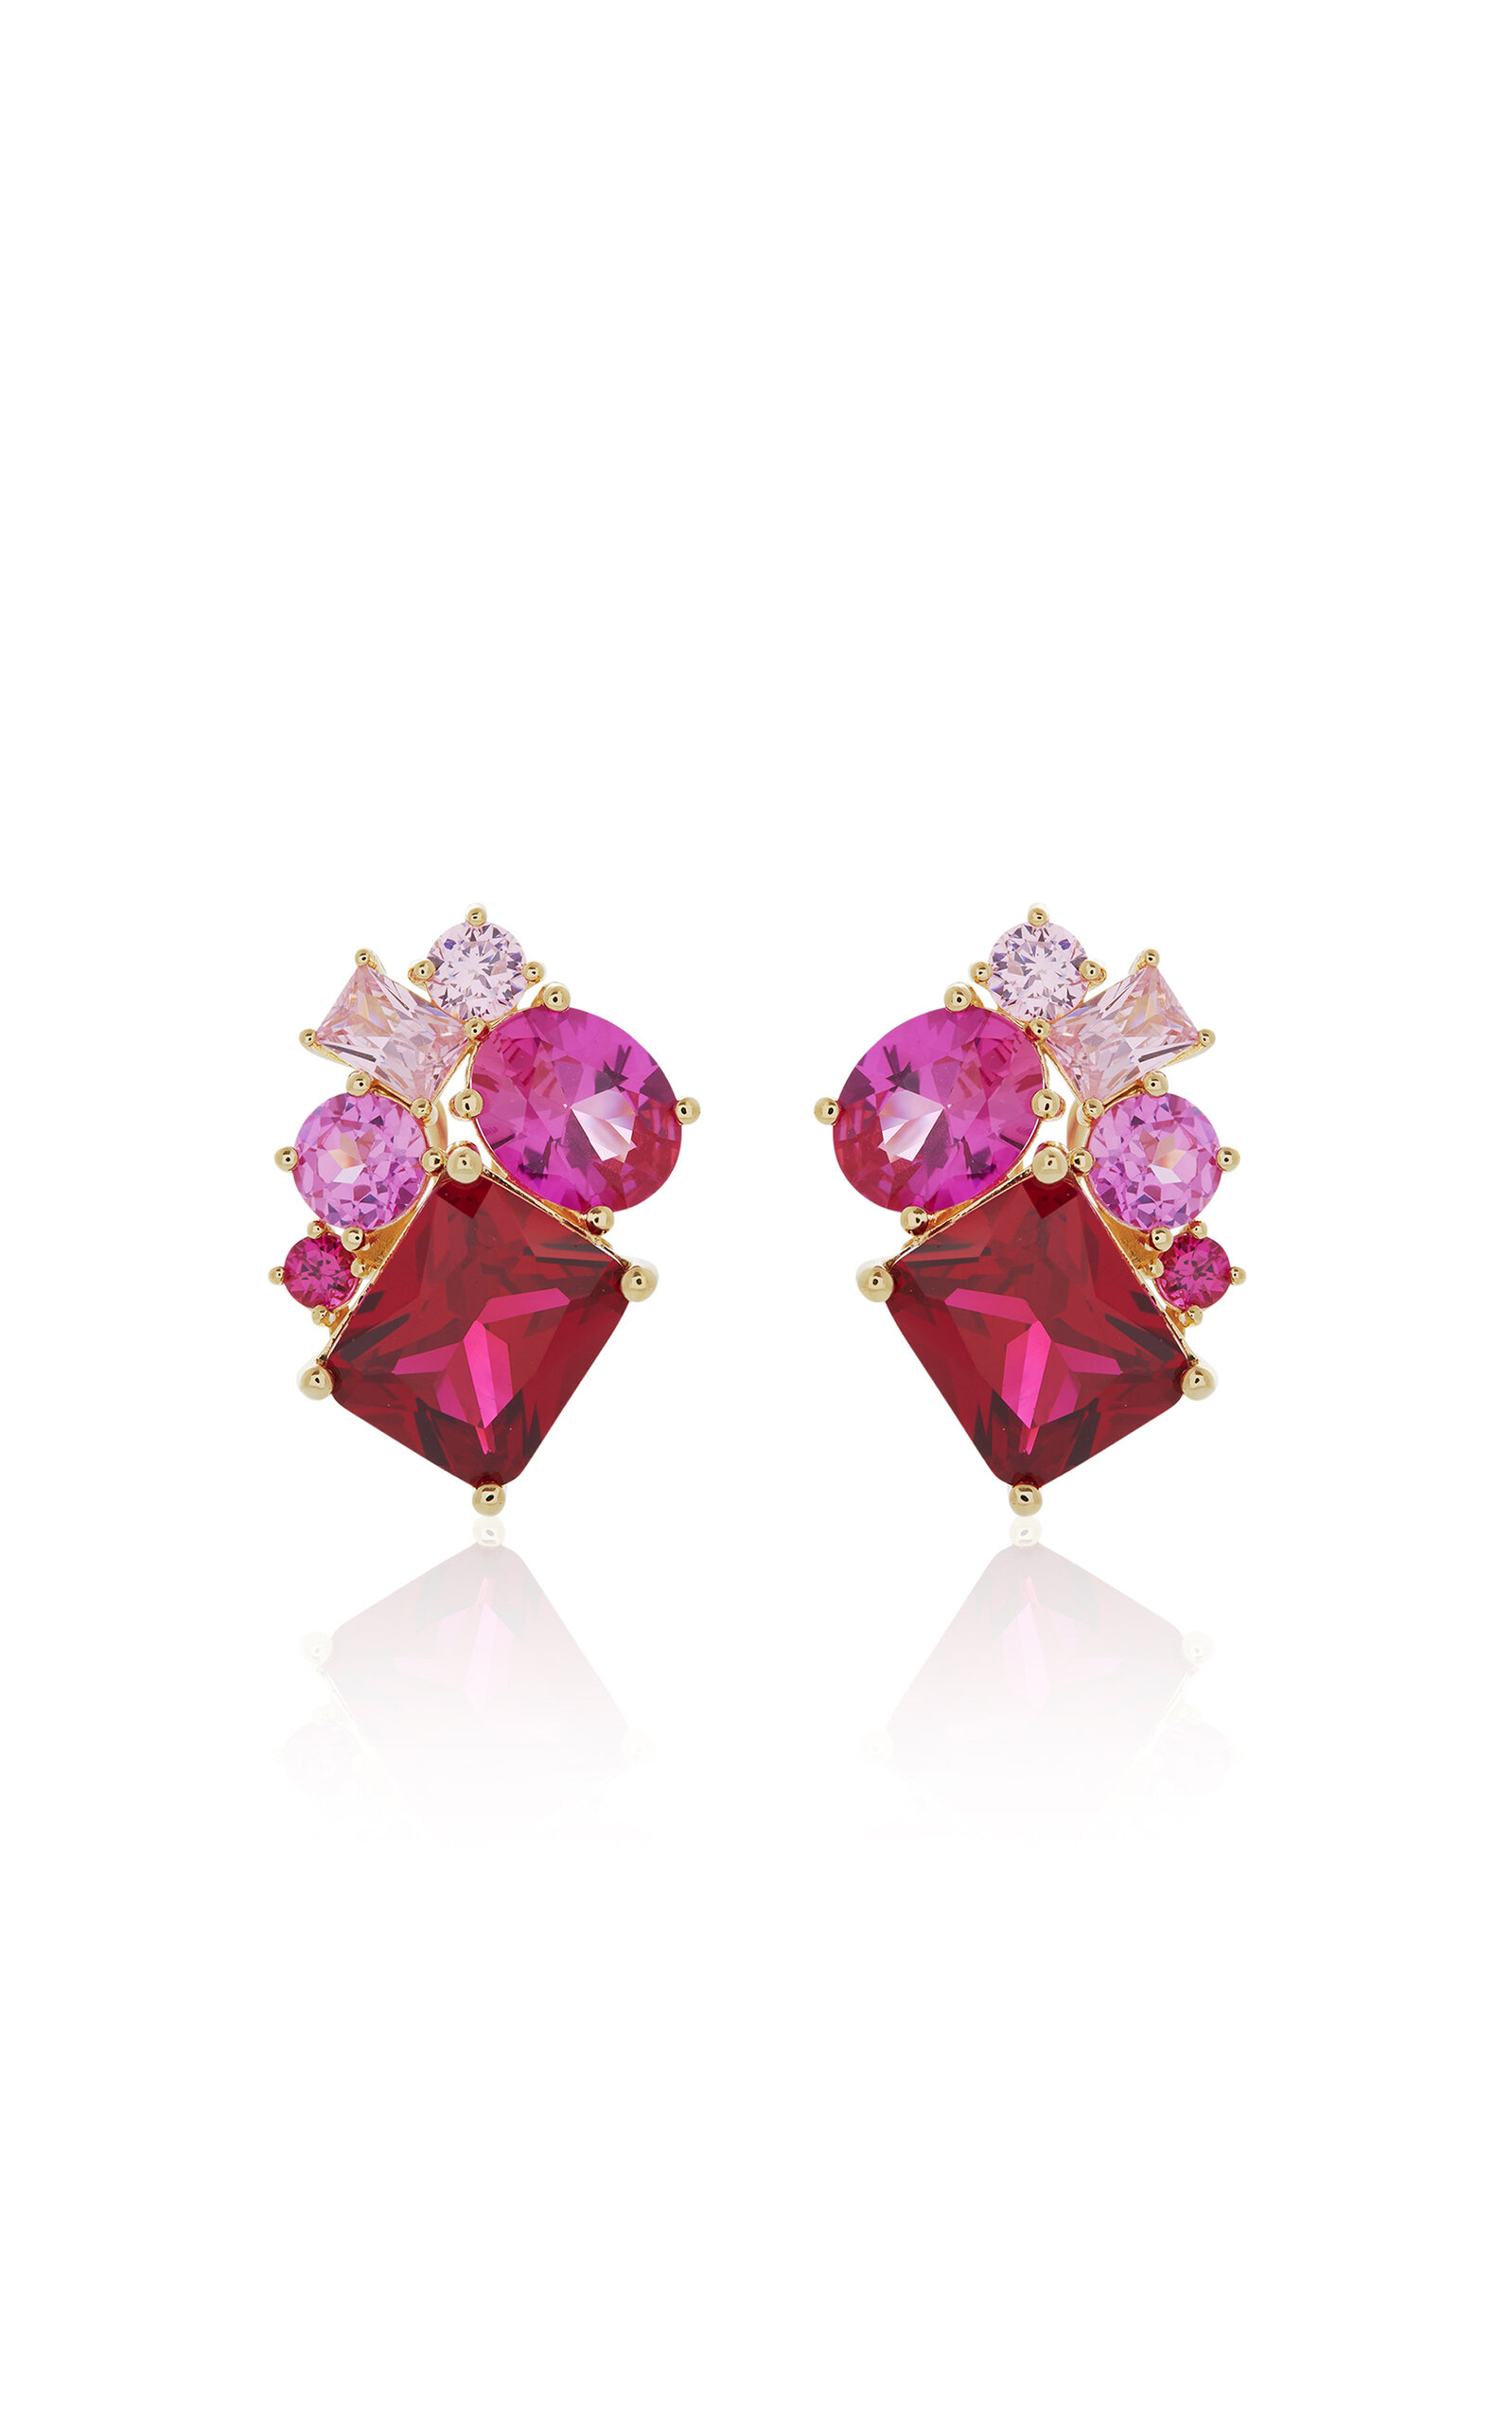 Judith Leiber Square Gem Cluster 14k Gold-plated Earrings In Pink